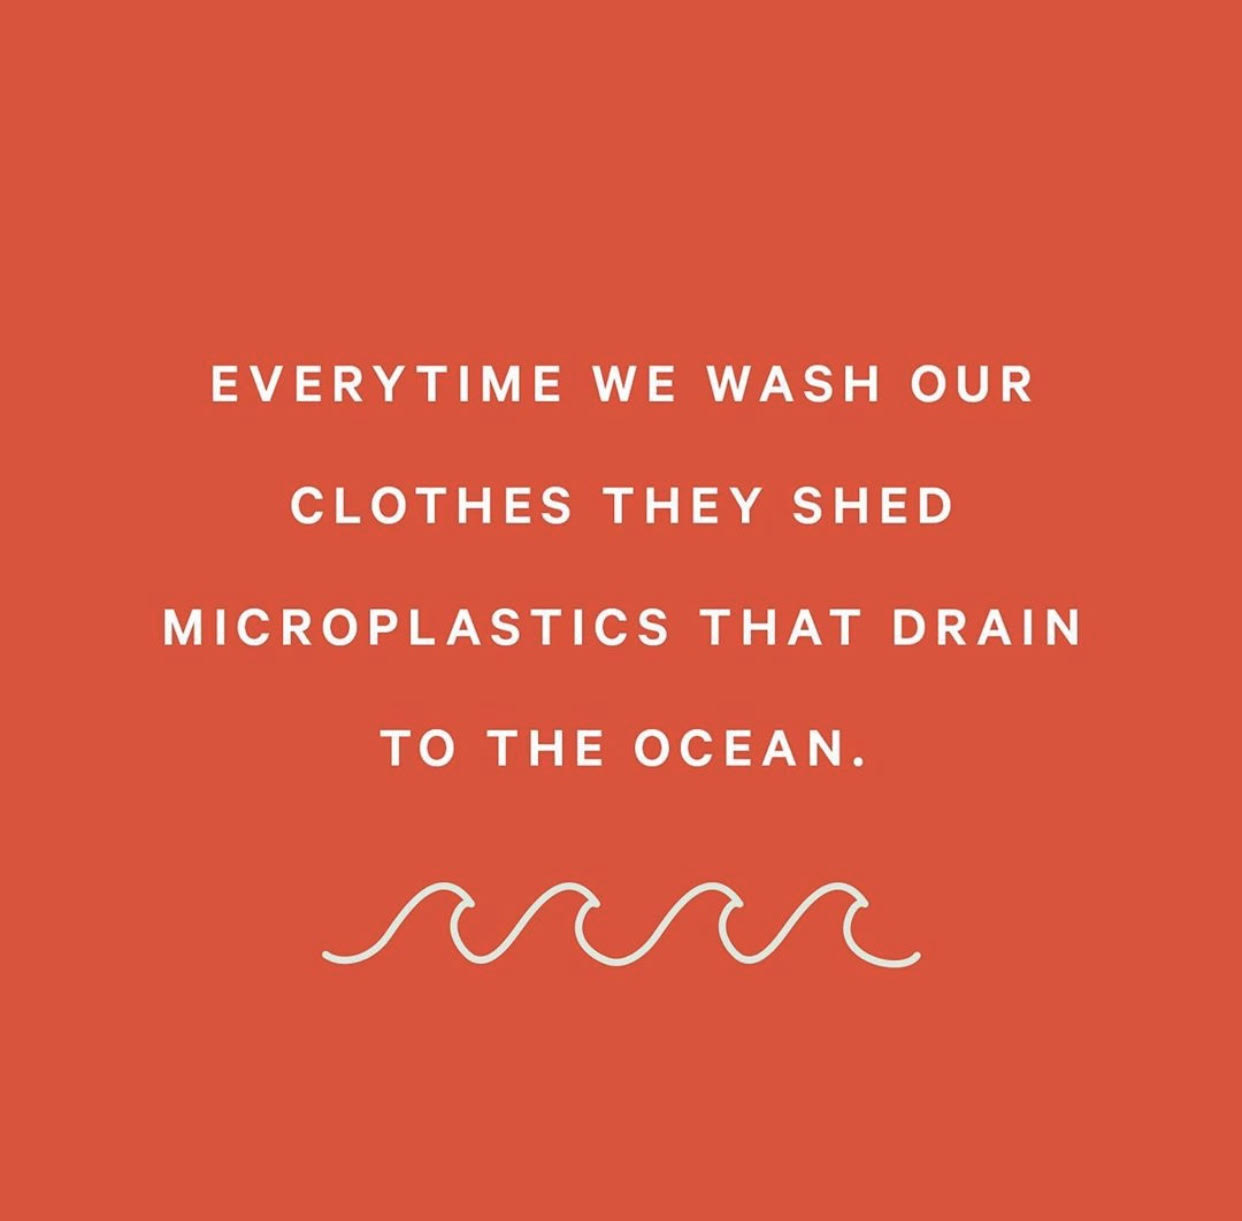 slide saying every time we wash our clothes they shed microplastics that drain to the ocean